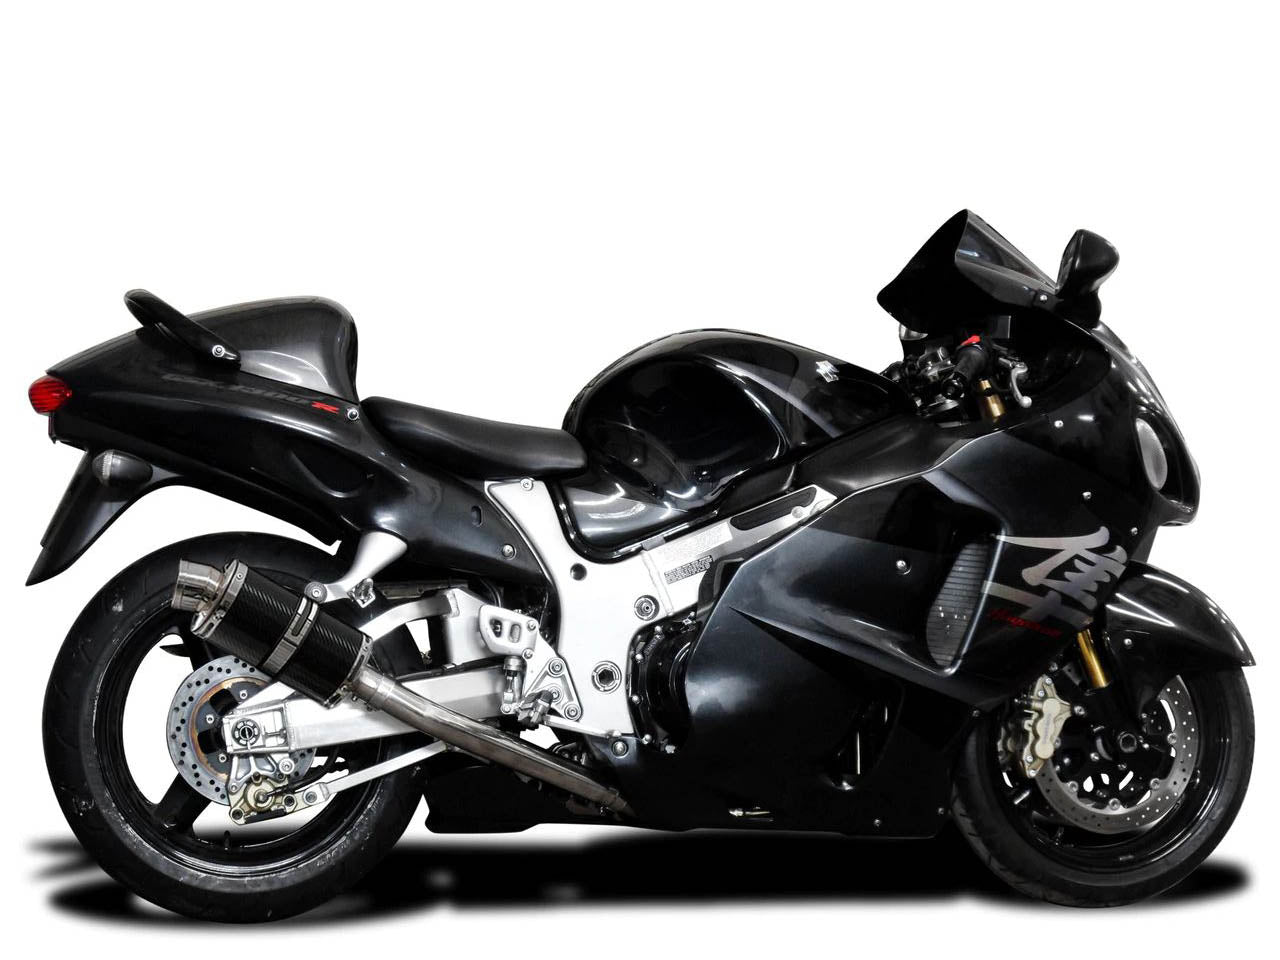 DELKEVIC Suzuki GSXR1300 Hayabusa (99/07) Full 4-1 Exhaust System with DS70 9" Carbon Silencer